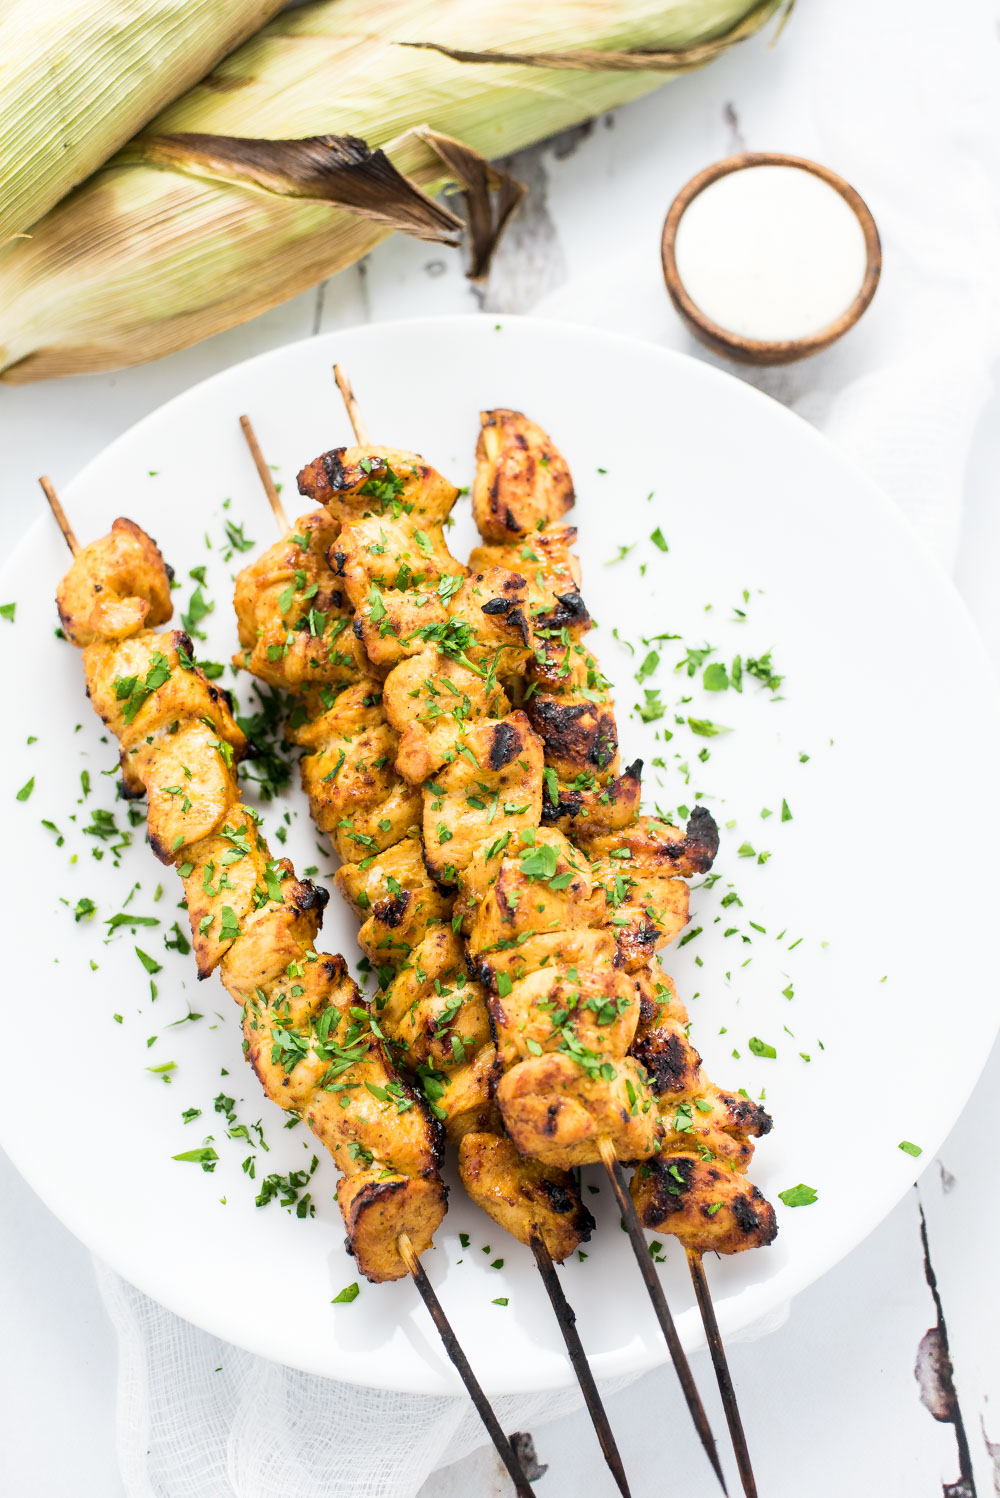 Grilled Mango Curry Chicken Skewers are an upscale outdoor weeknight or weekend dinner recipe! They are great in tacos, on salads, or all by themselves!